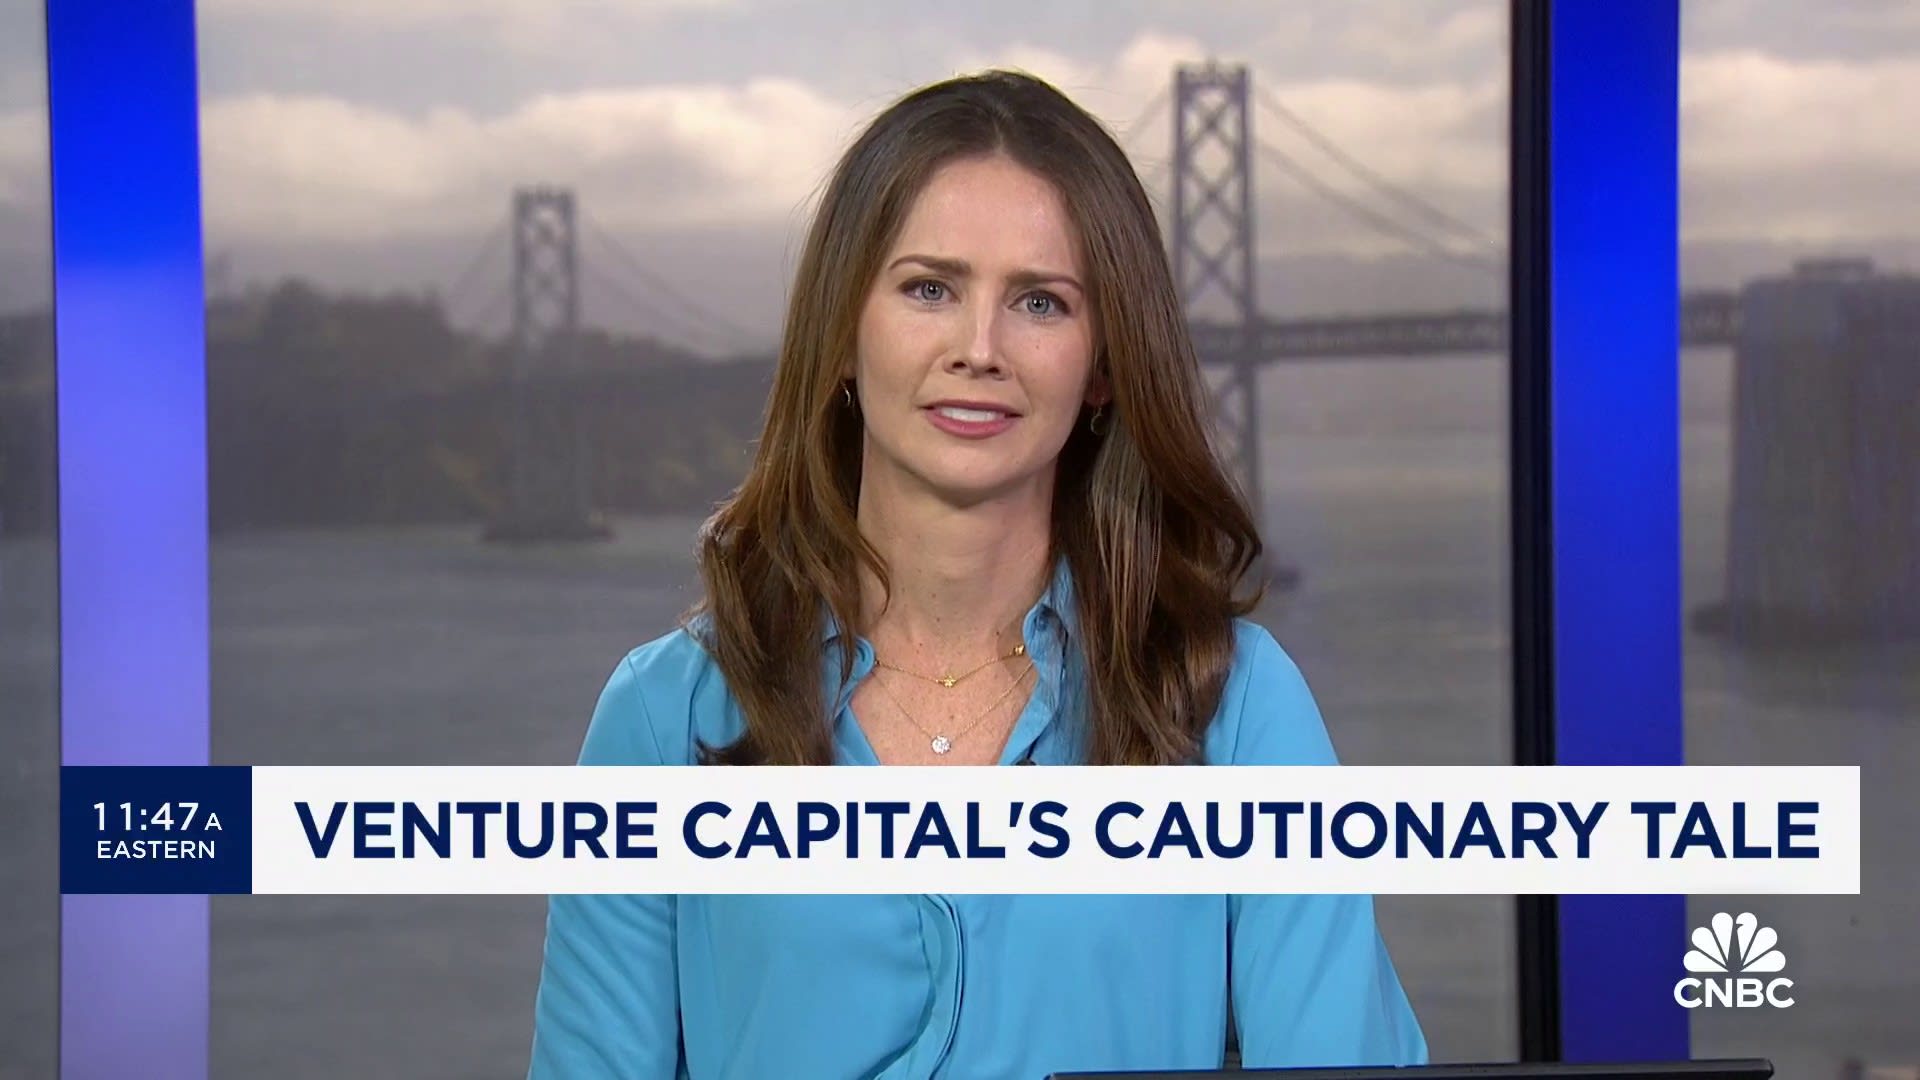 Fed remains in focus for venture capital investors after strong CPI report